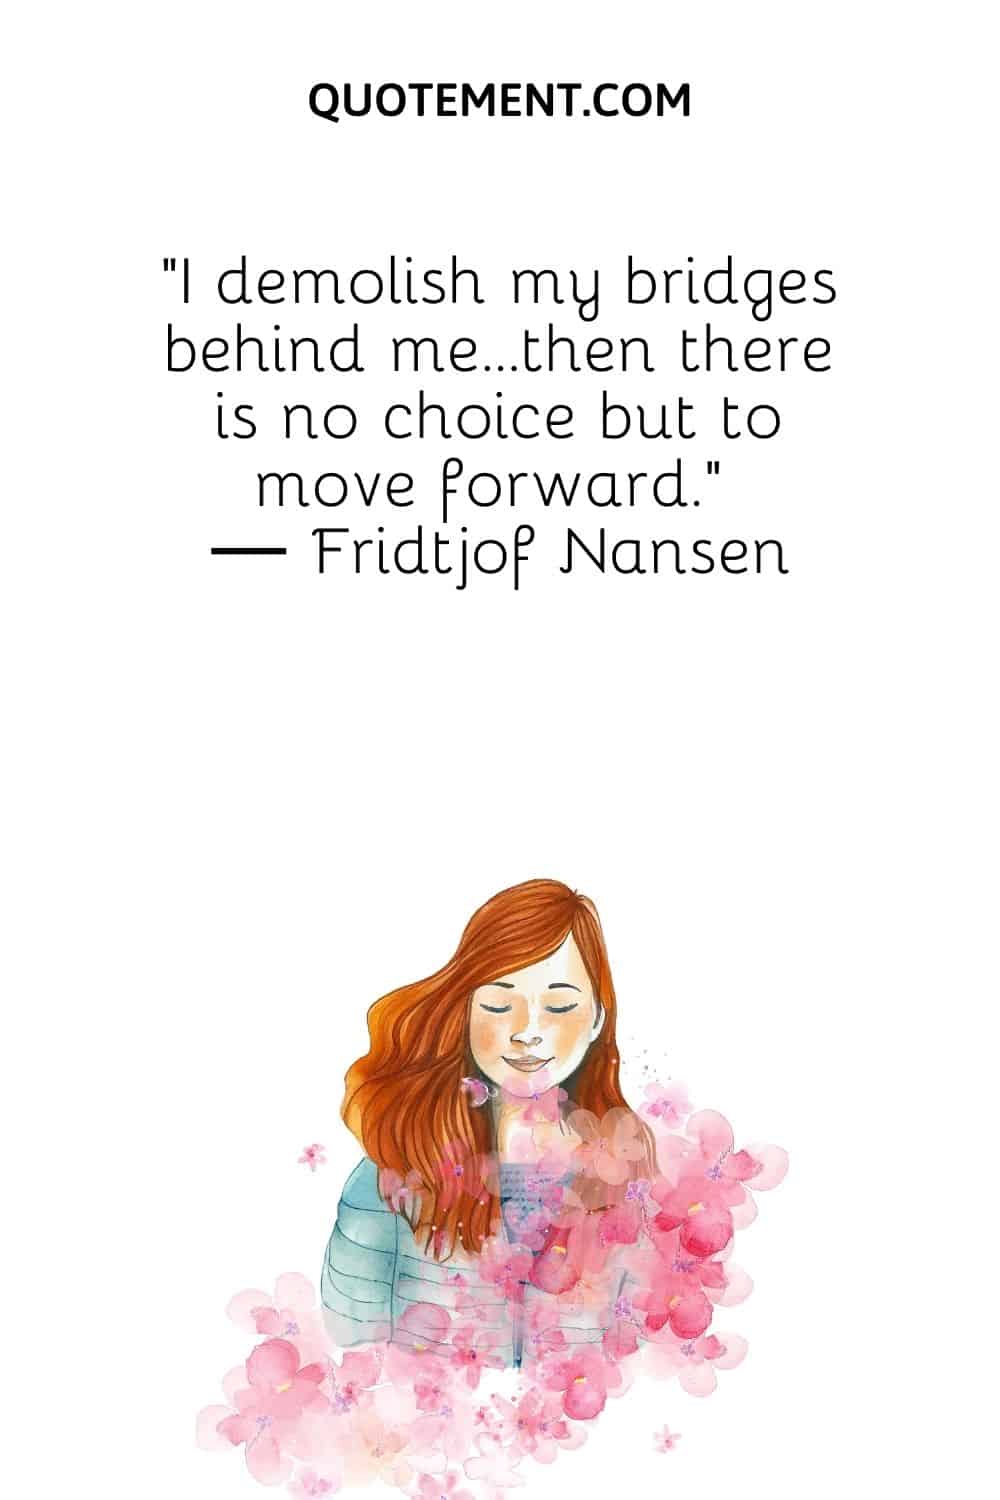 I demolish my bridges behind me...then there is no choice but to move forward